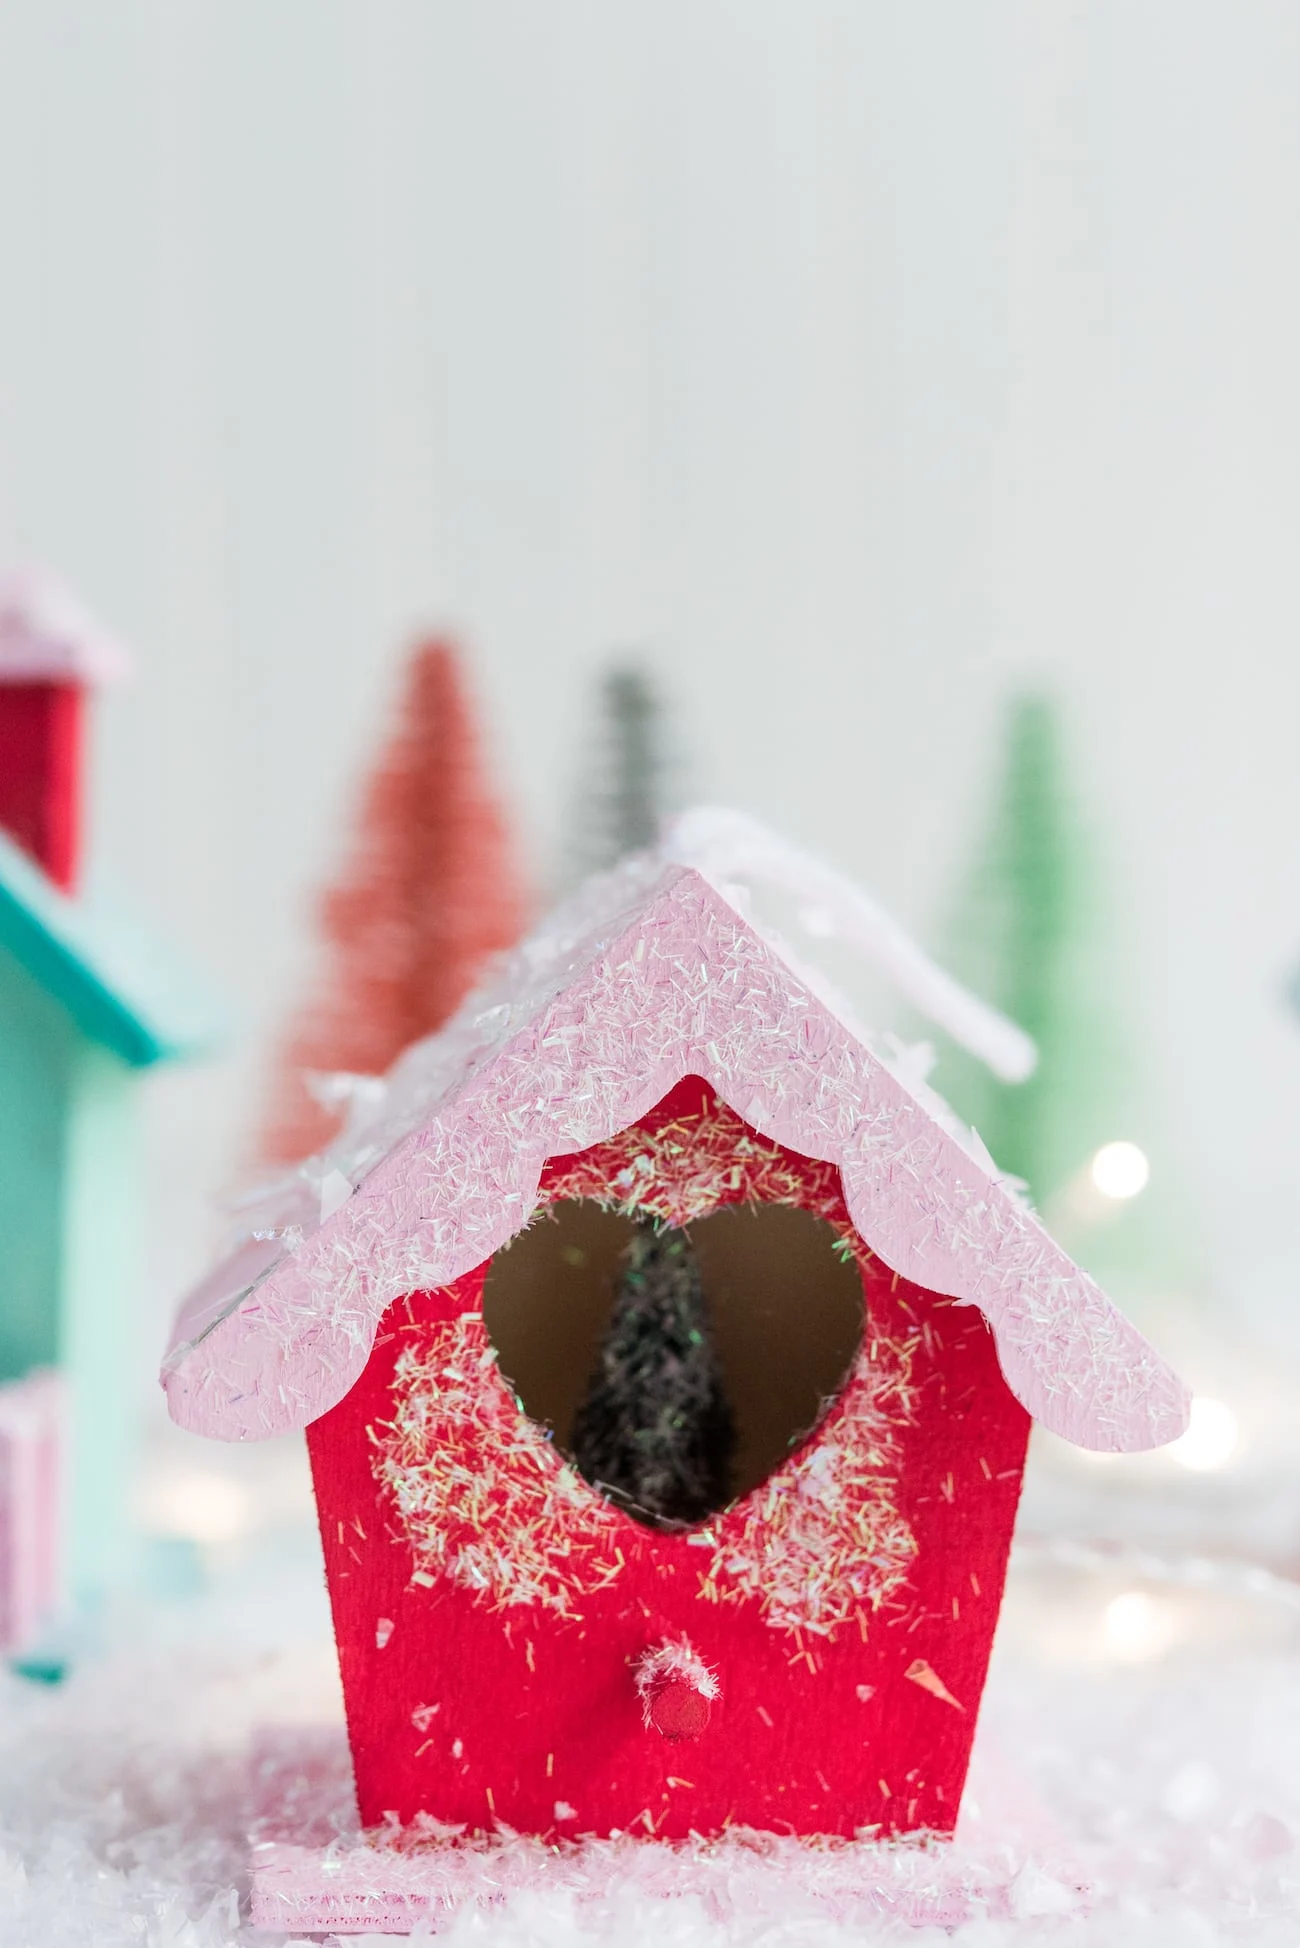 DIY Christmas Village Ornaments | Christmas crafts, holiday entertaining tips, Christmas cocktails and more from entertaining blog @cydconverse